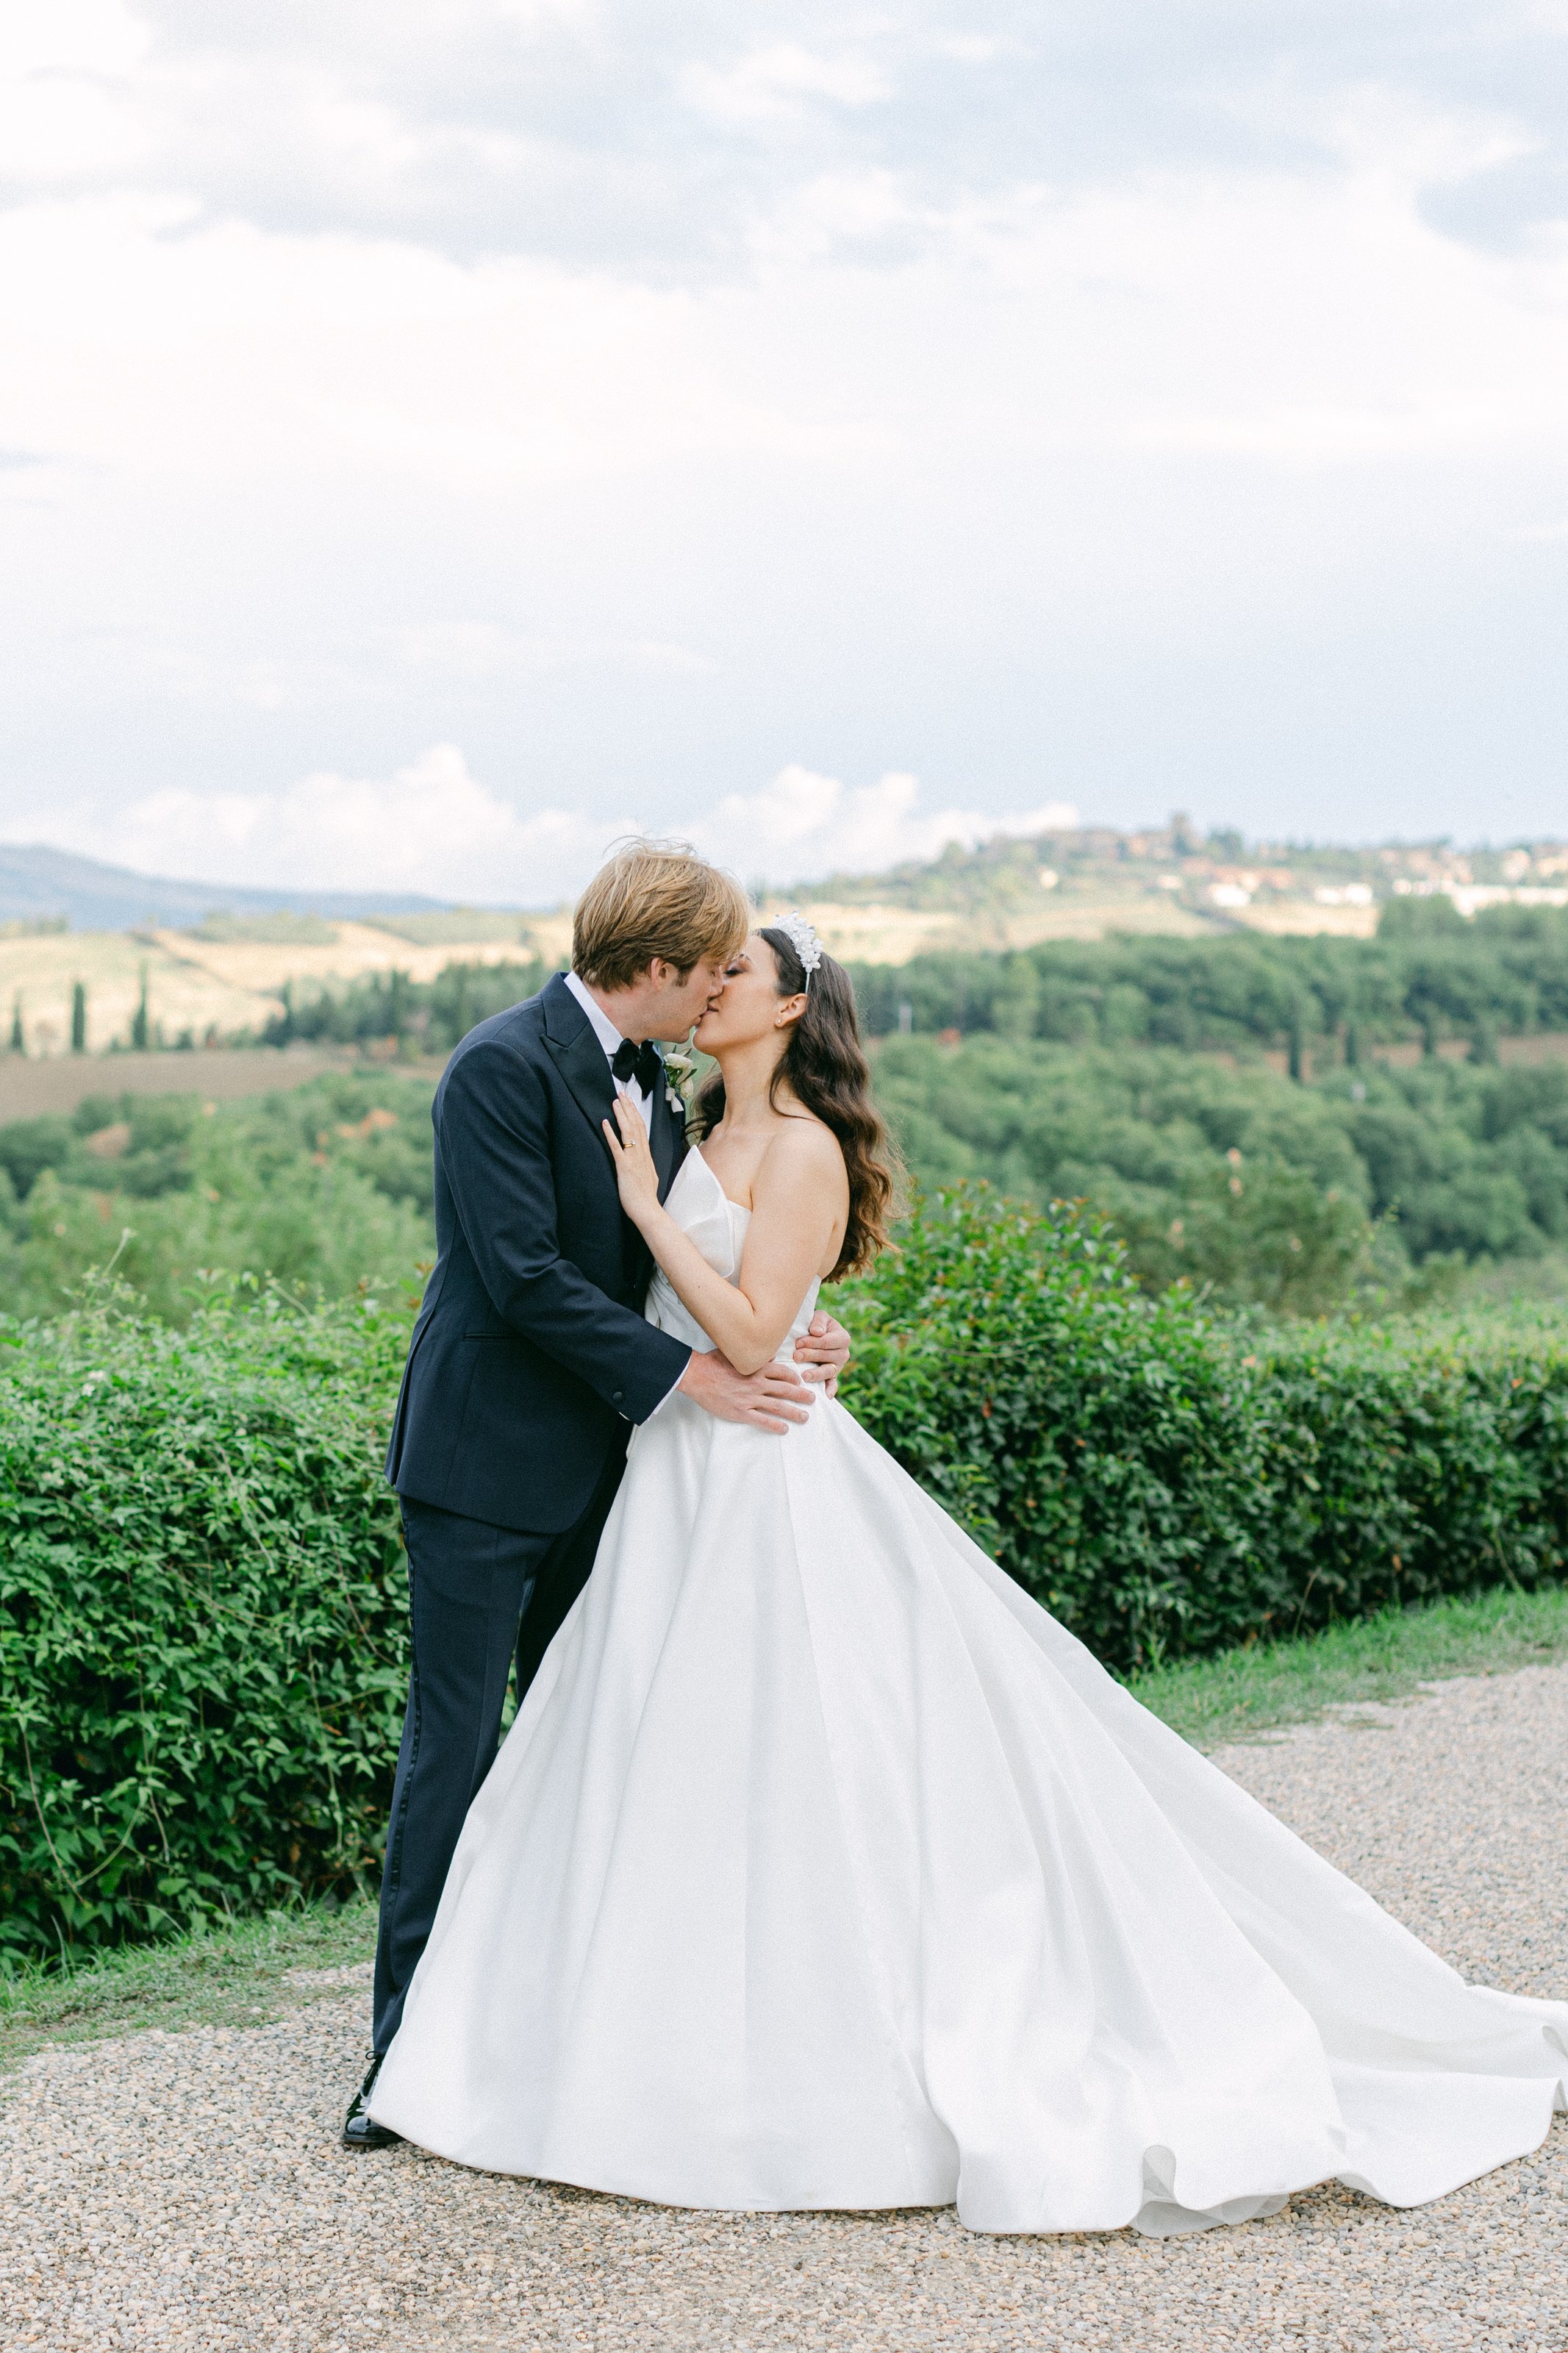 Bride and groom portrait kissing in Tuscany